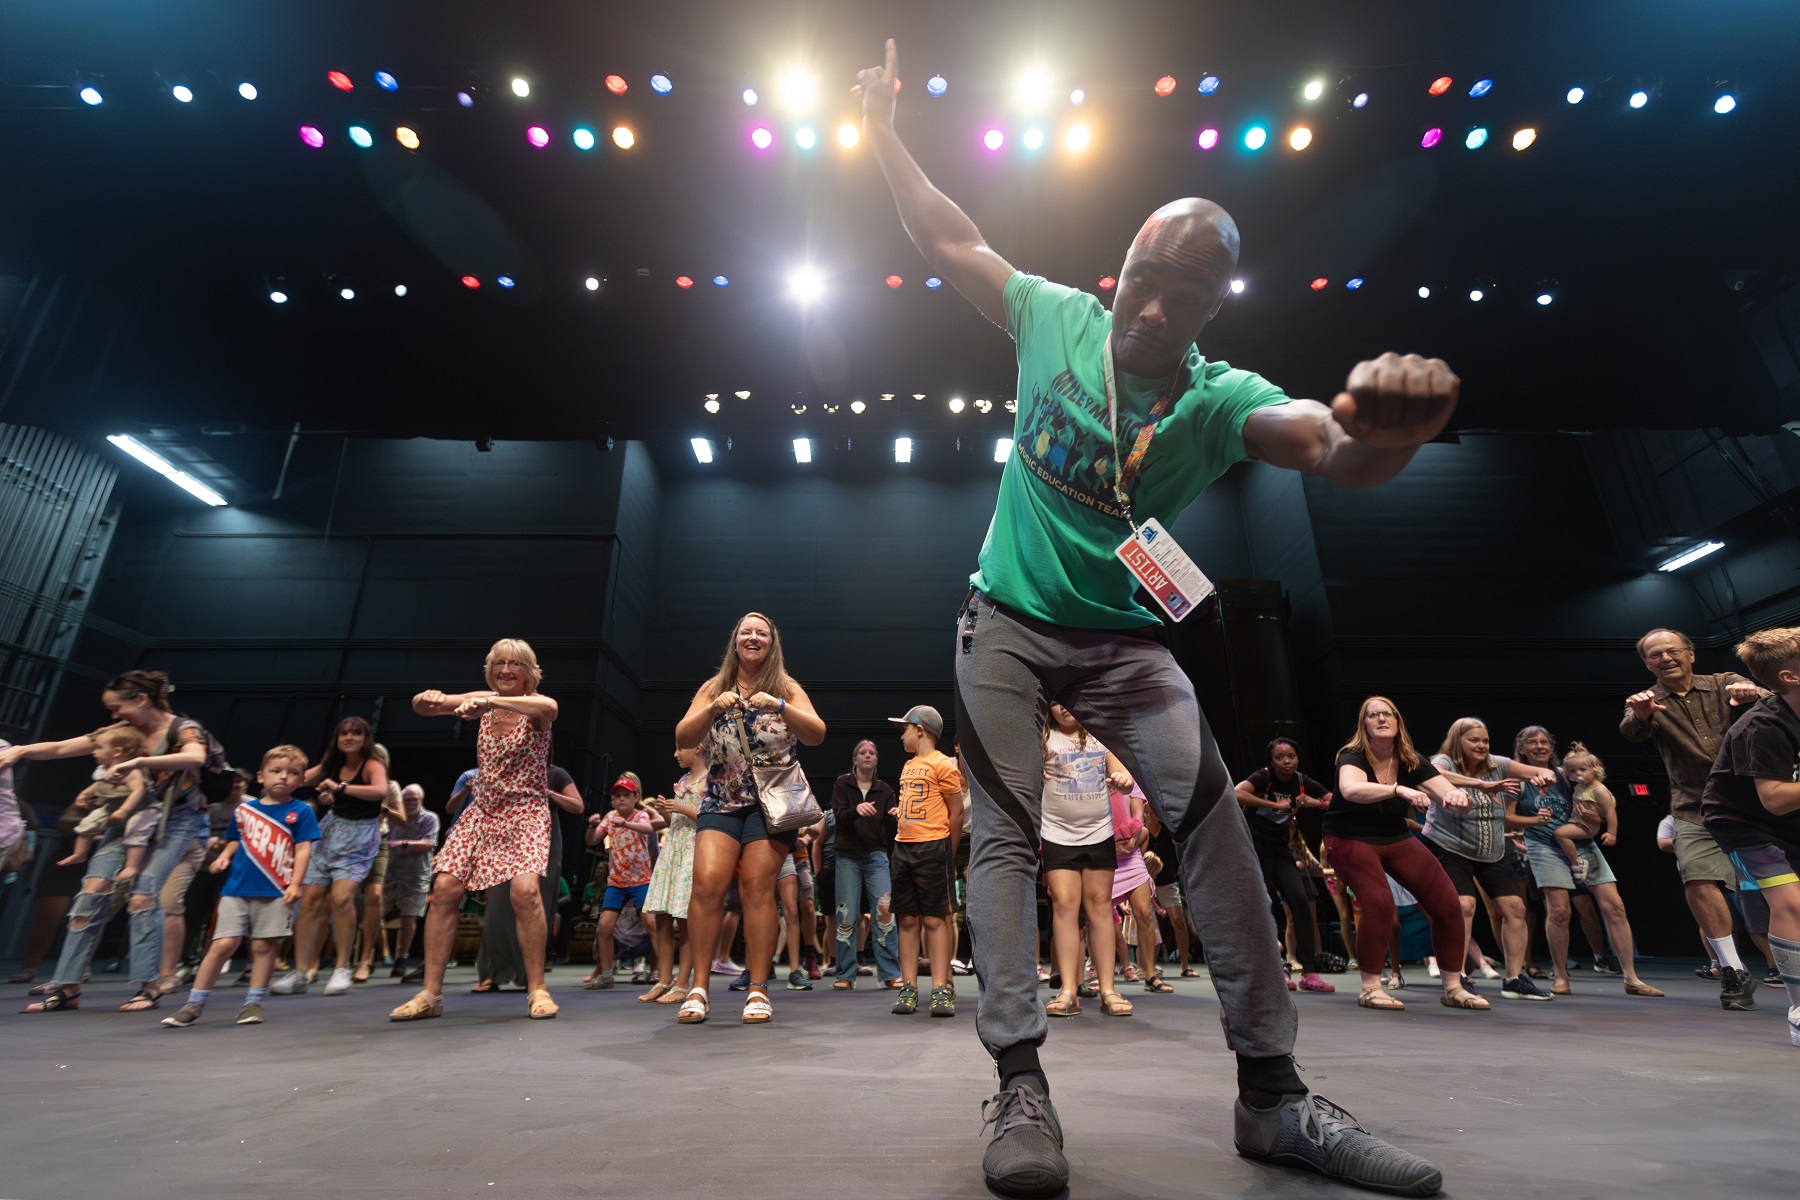 Dance instruction takes place on the stage of the Fox Cities Performing Arts Center during the 2023 Mile of Music festival.